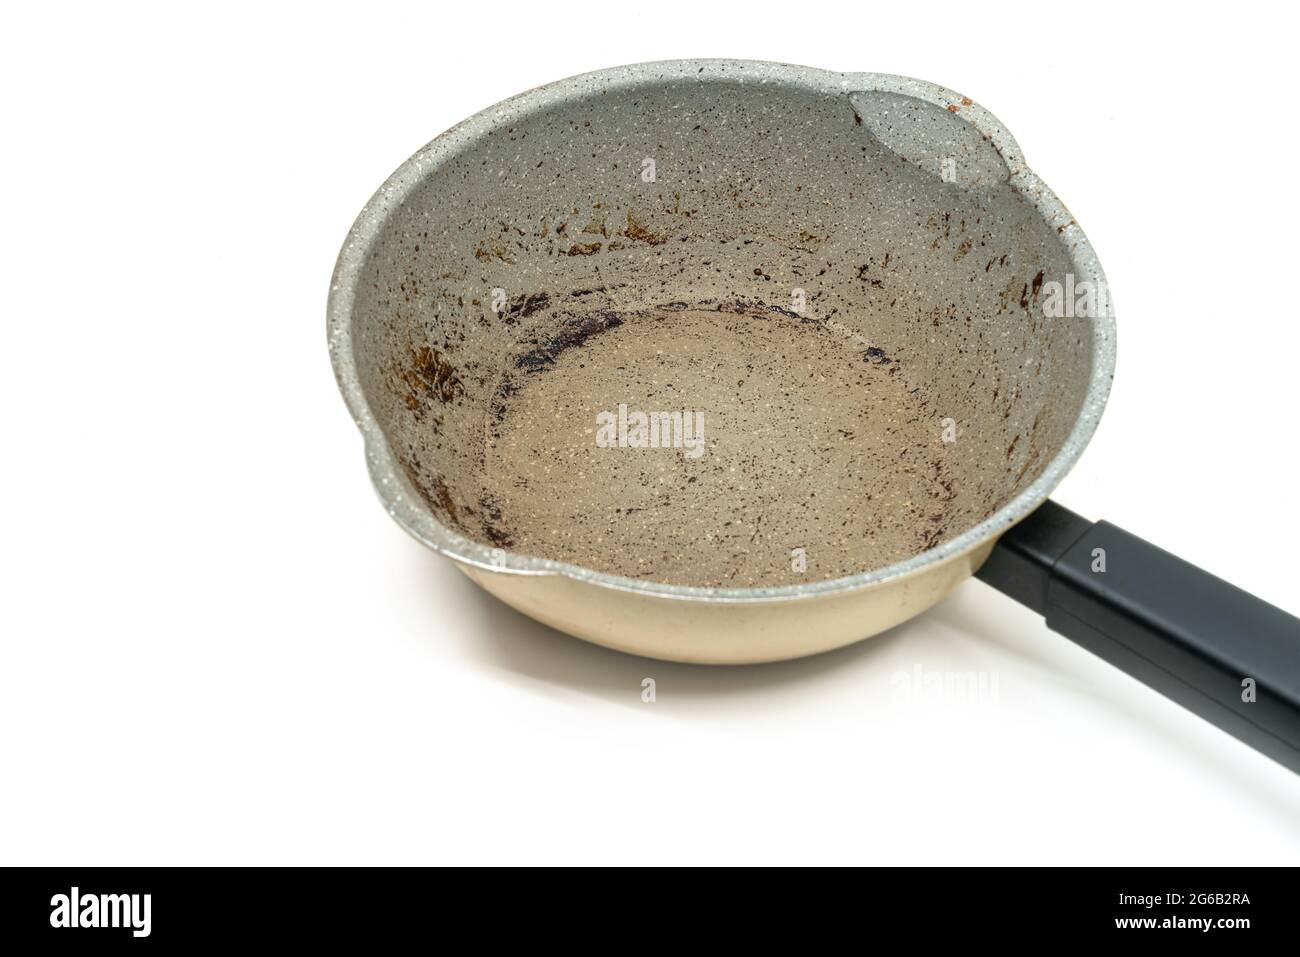 Small modern saucepan with burning mark on the surface, modern pan with black handle, 45-degree angle view, the image on white background. Stock Photo